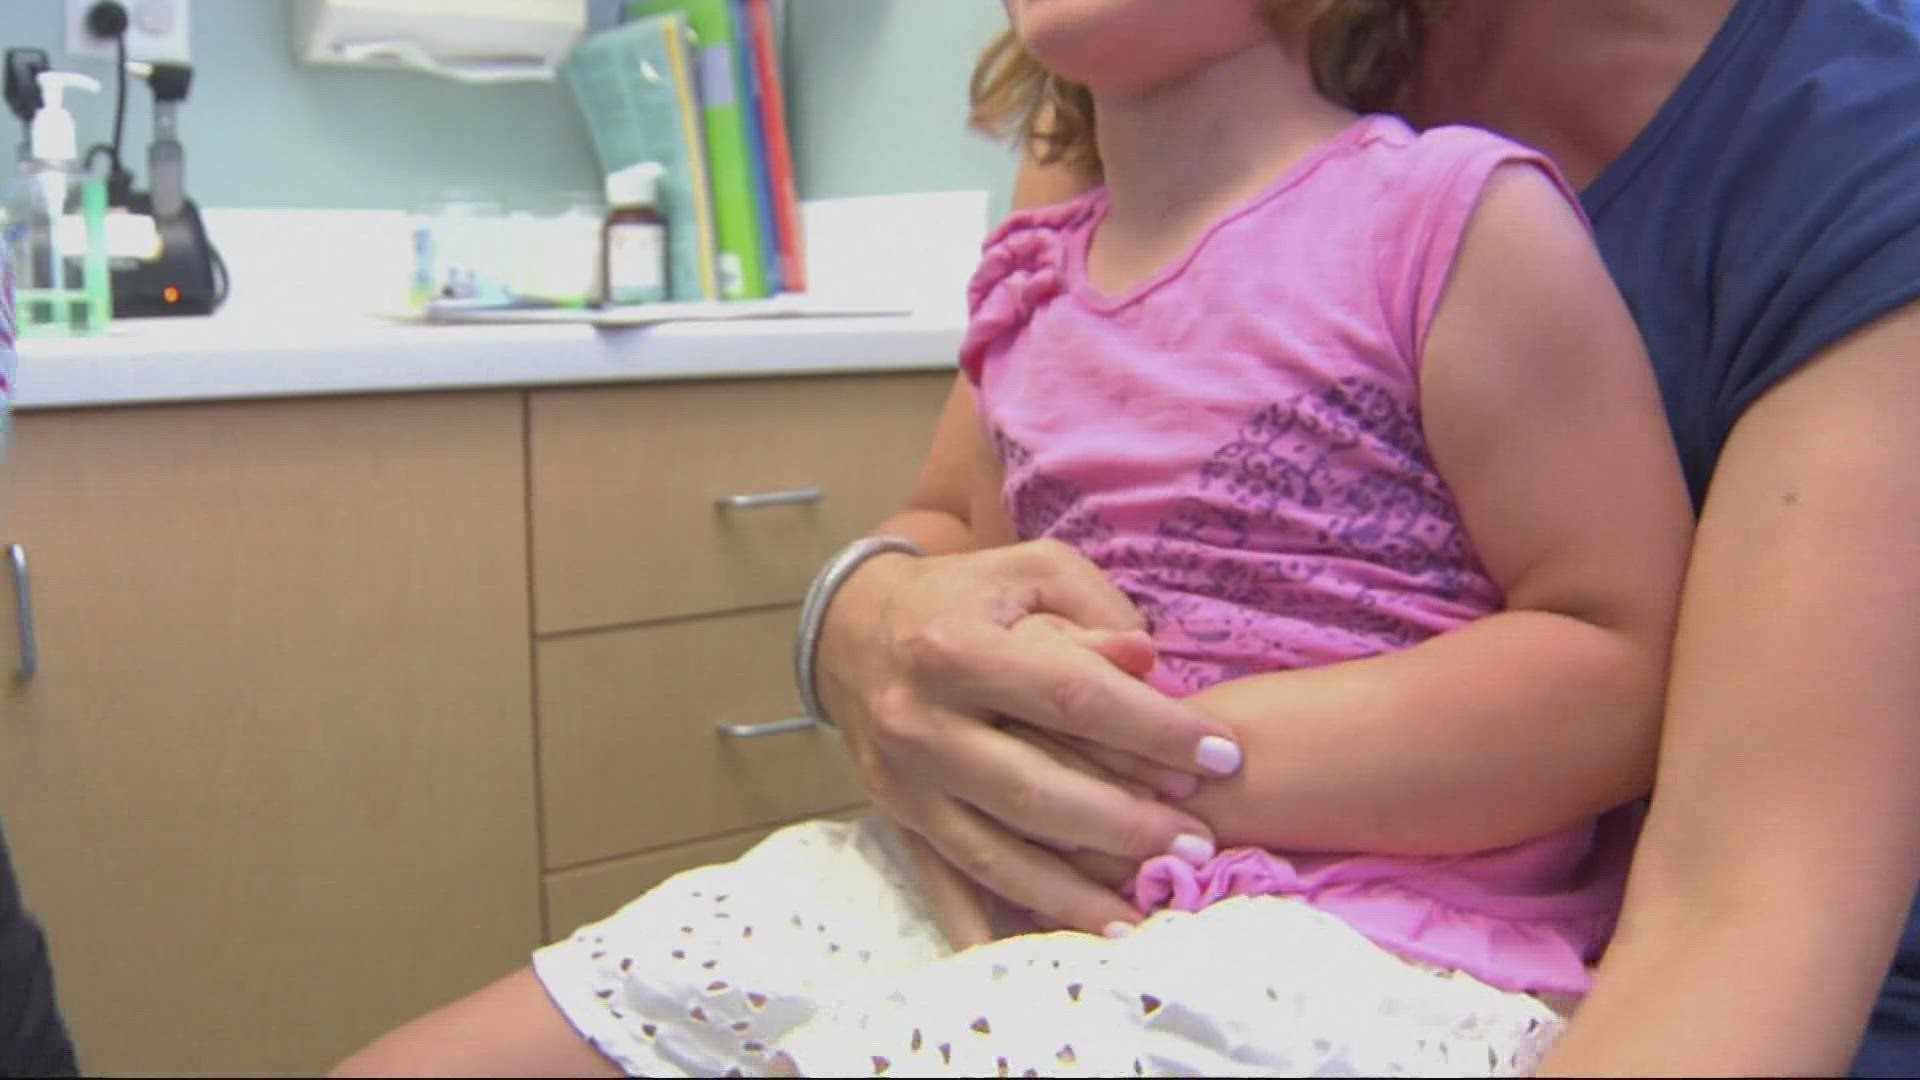 Parents of children ages 5 and under can finally get their kids vaccinated against COVID-19 in Oregon.